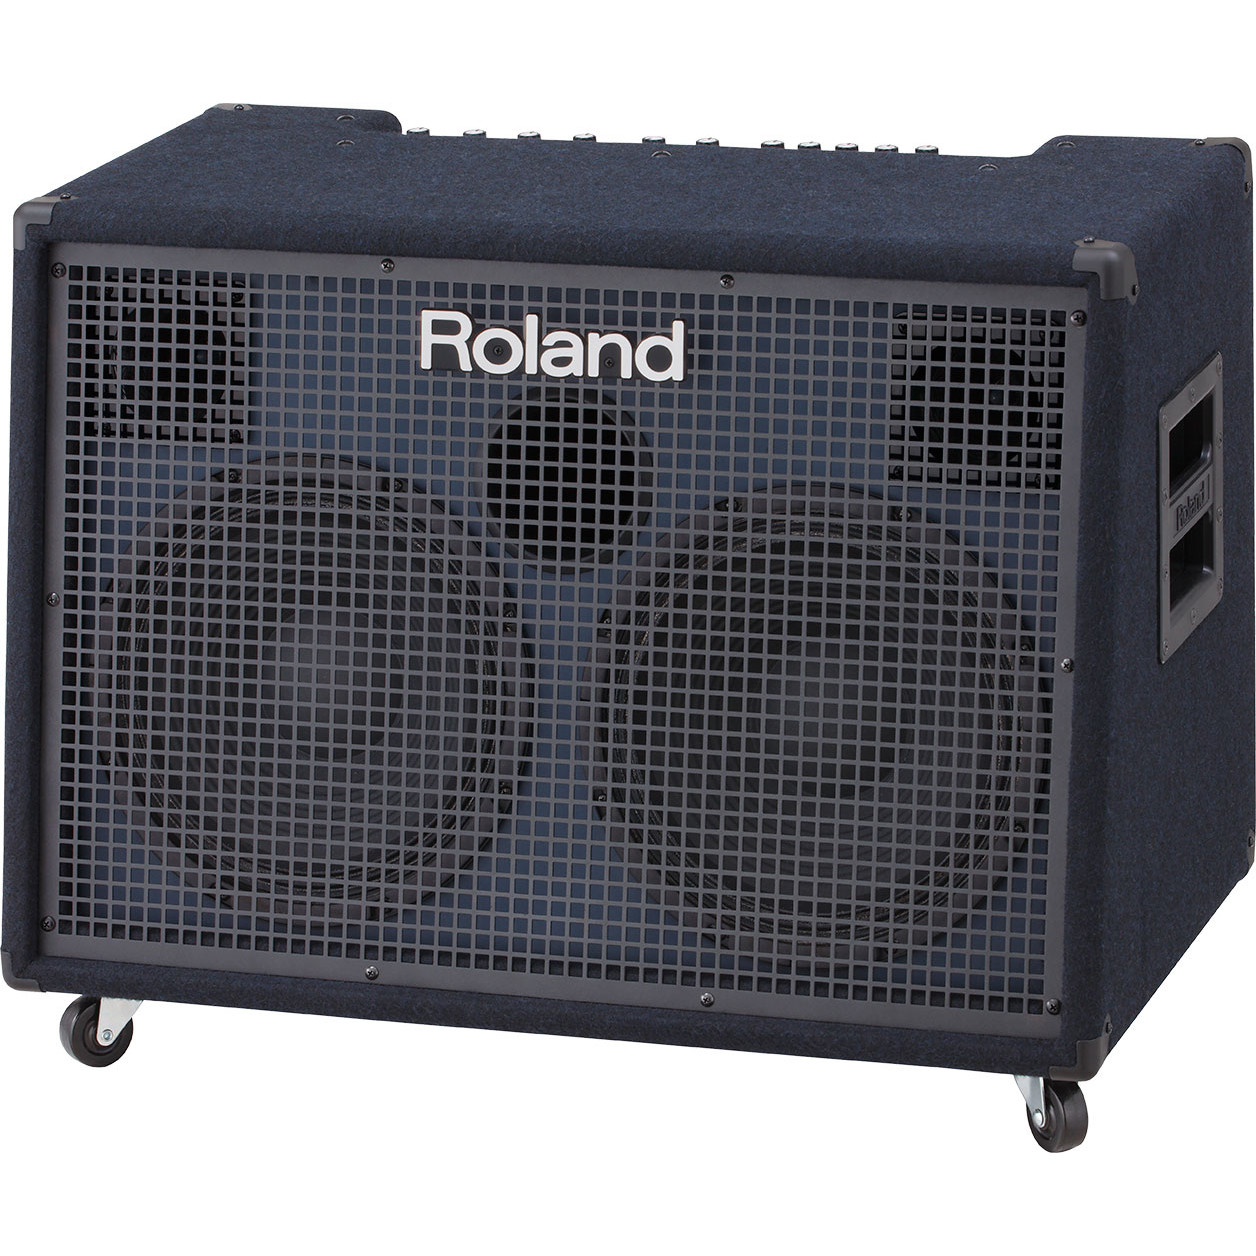 Roland Kc 990 160w + 160w Stereo 4 Ch Keyboard Amp Effect -  - Variation 1